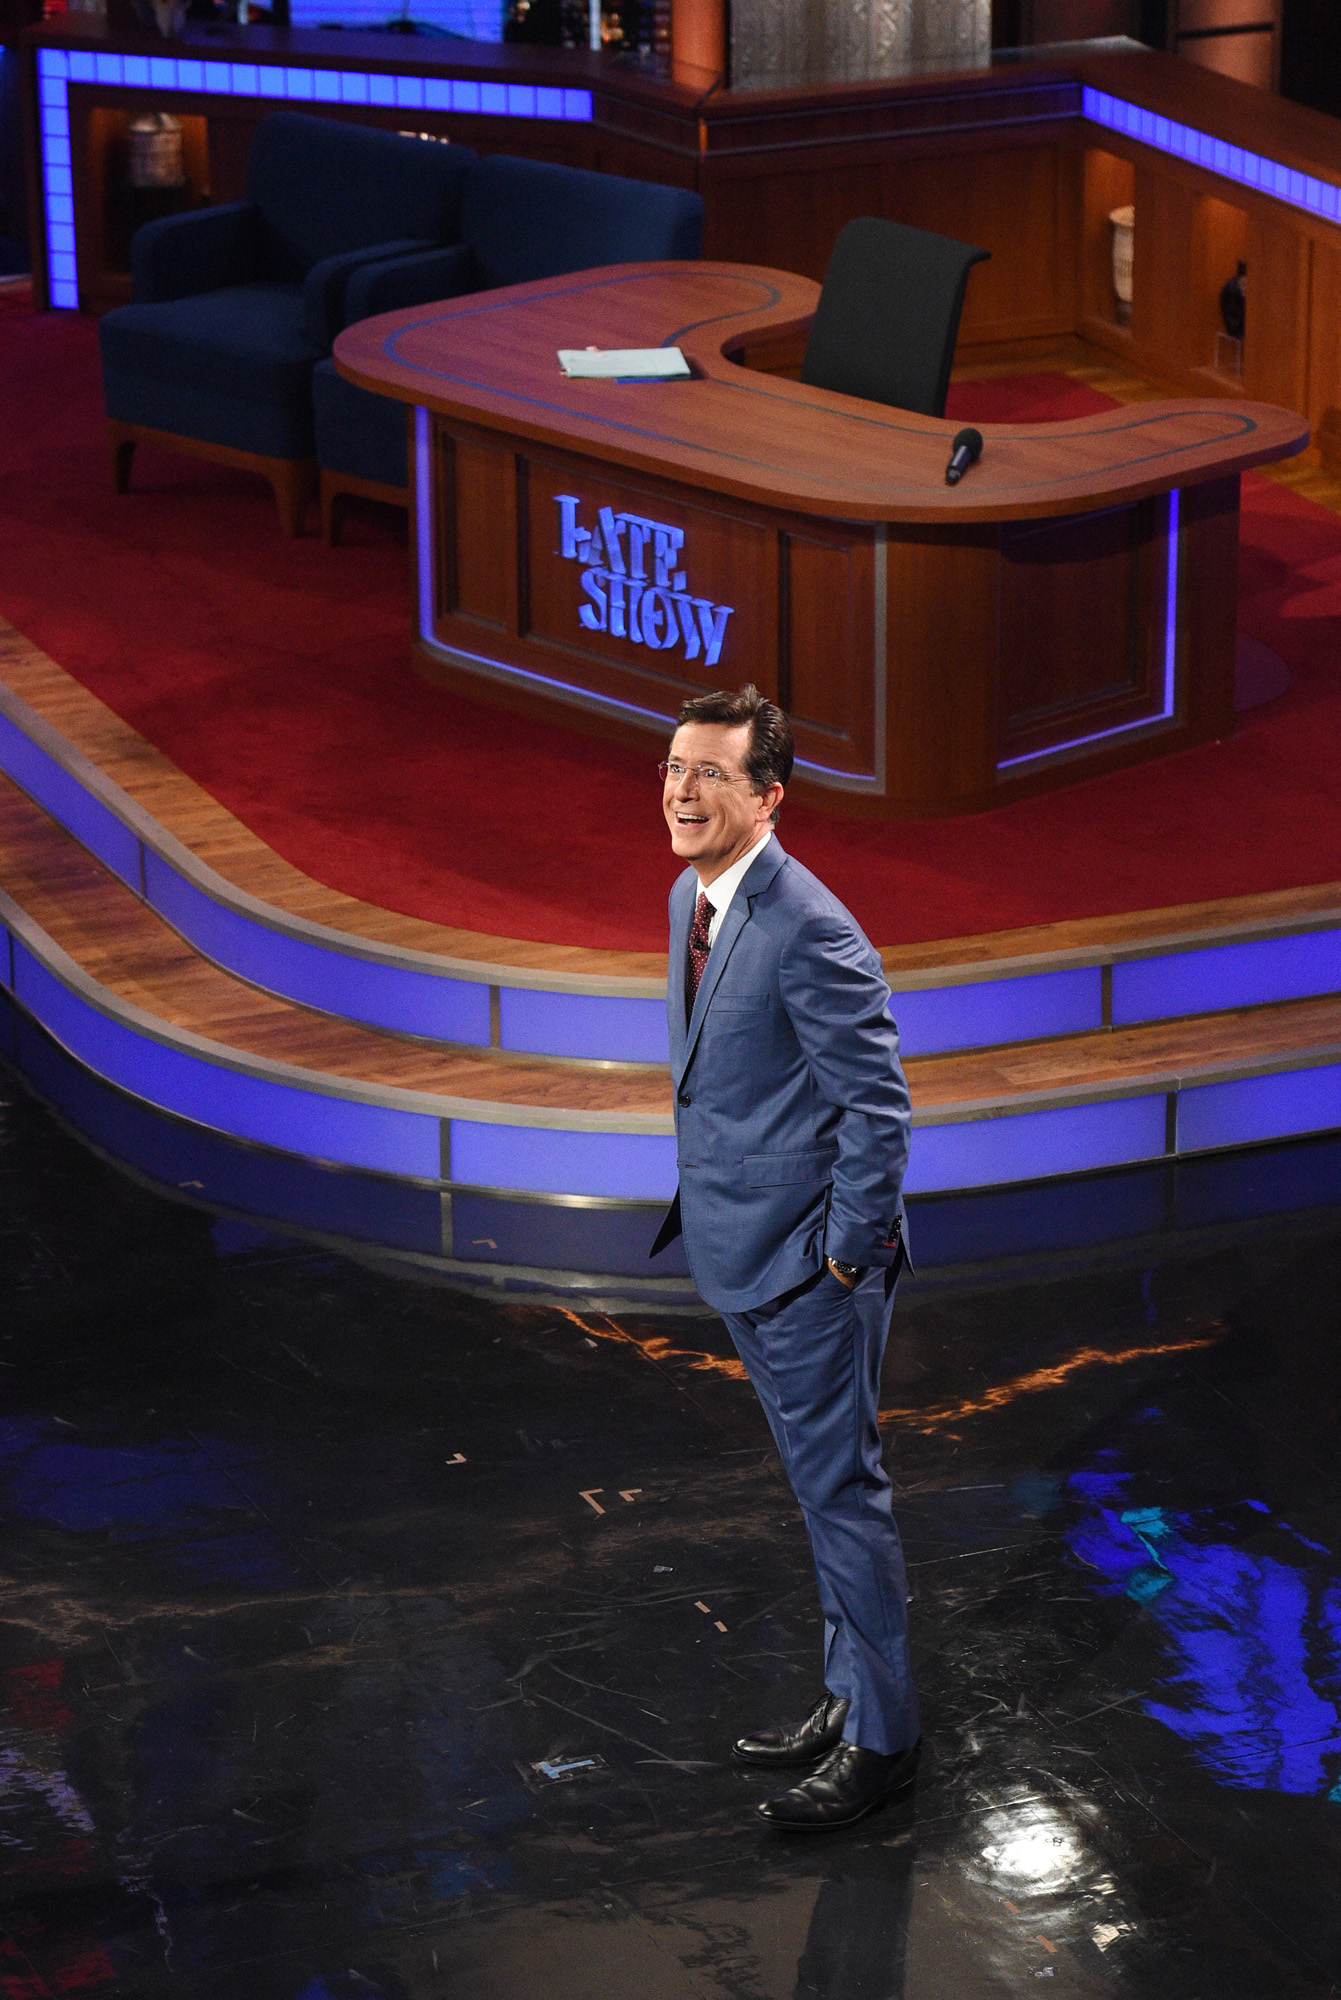 Stephen Colbert during the premiere episode of "The Late Show with Stephen Colbert" on Sept. 8, 2015. (Jeffrey R. Staab—CBS via Getty Images)